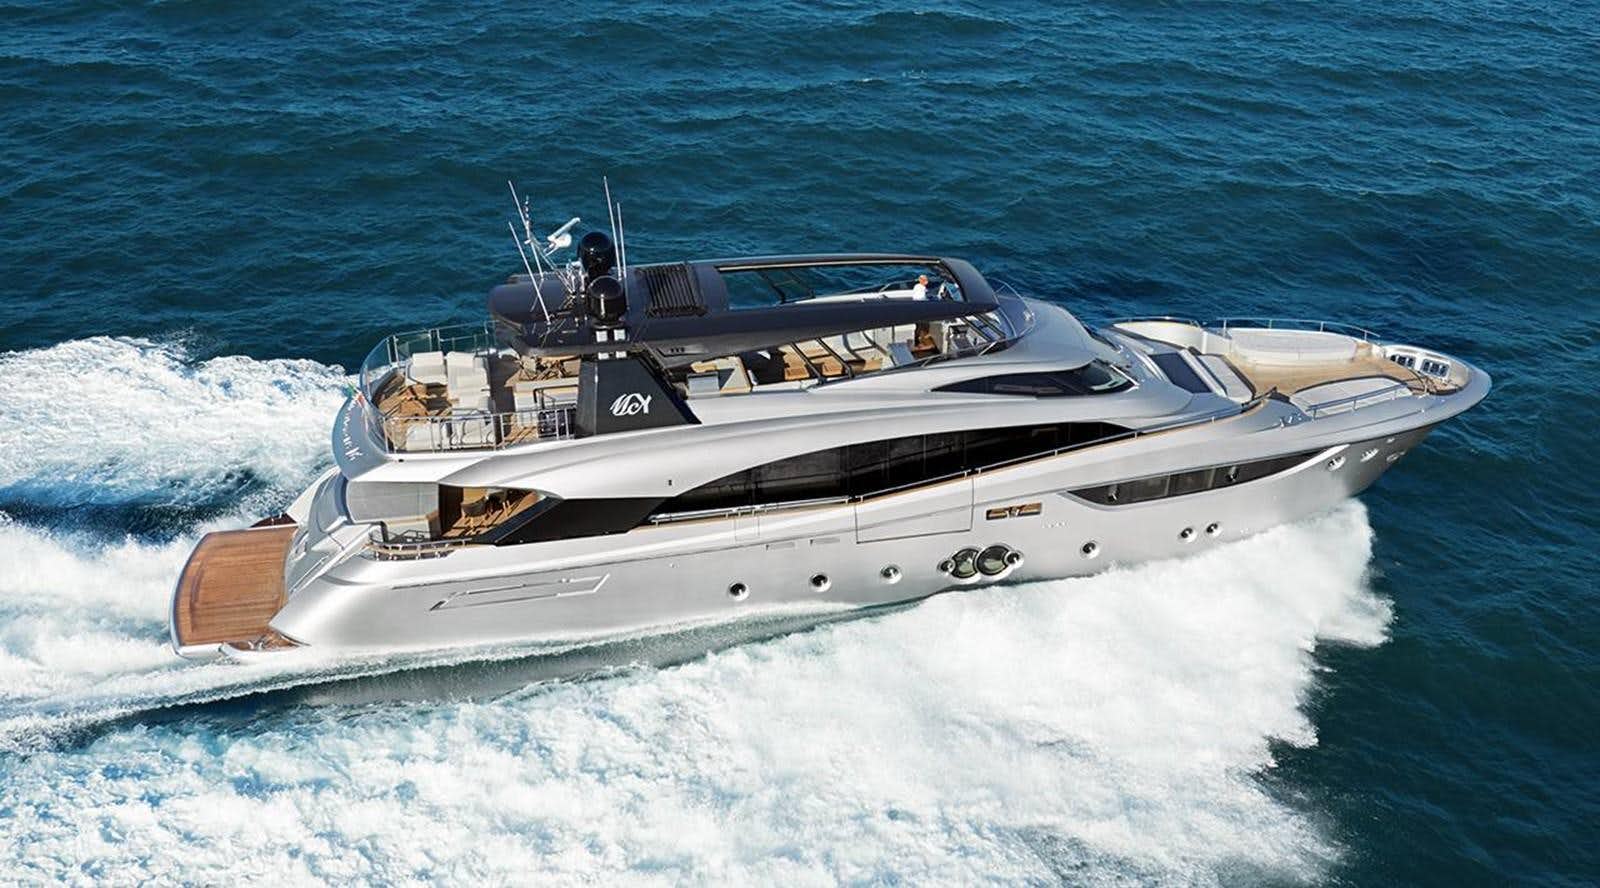 Monte carlo mcy 105
Yacht for Sale